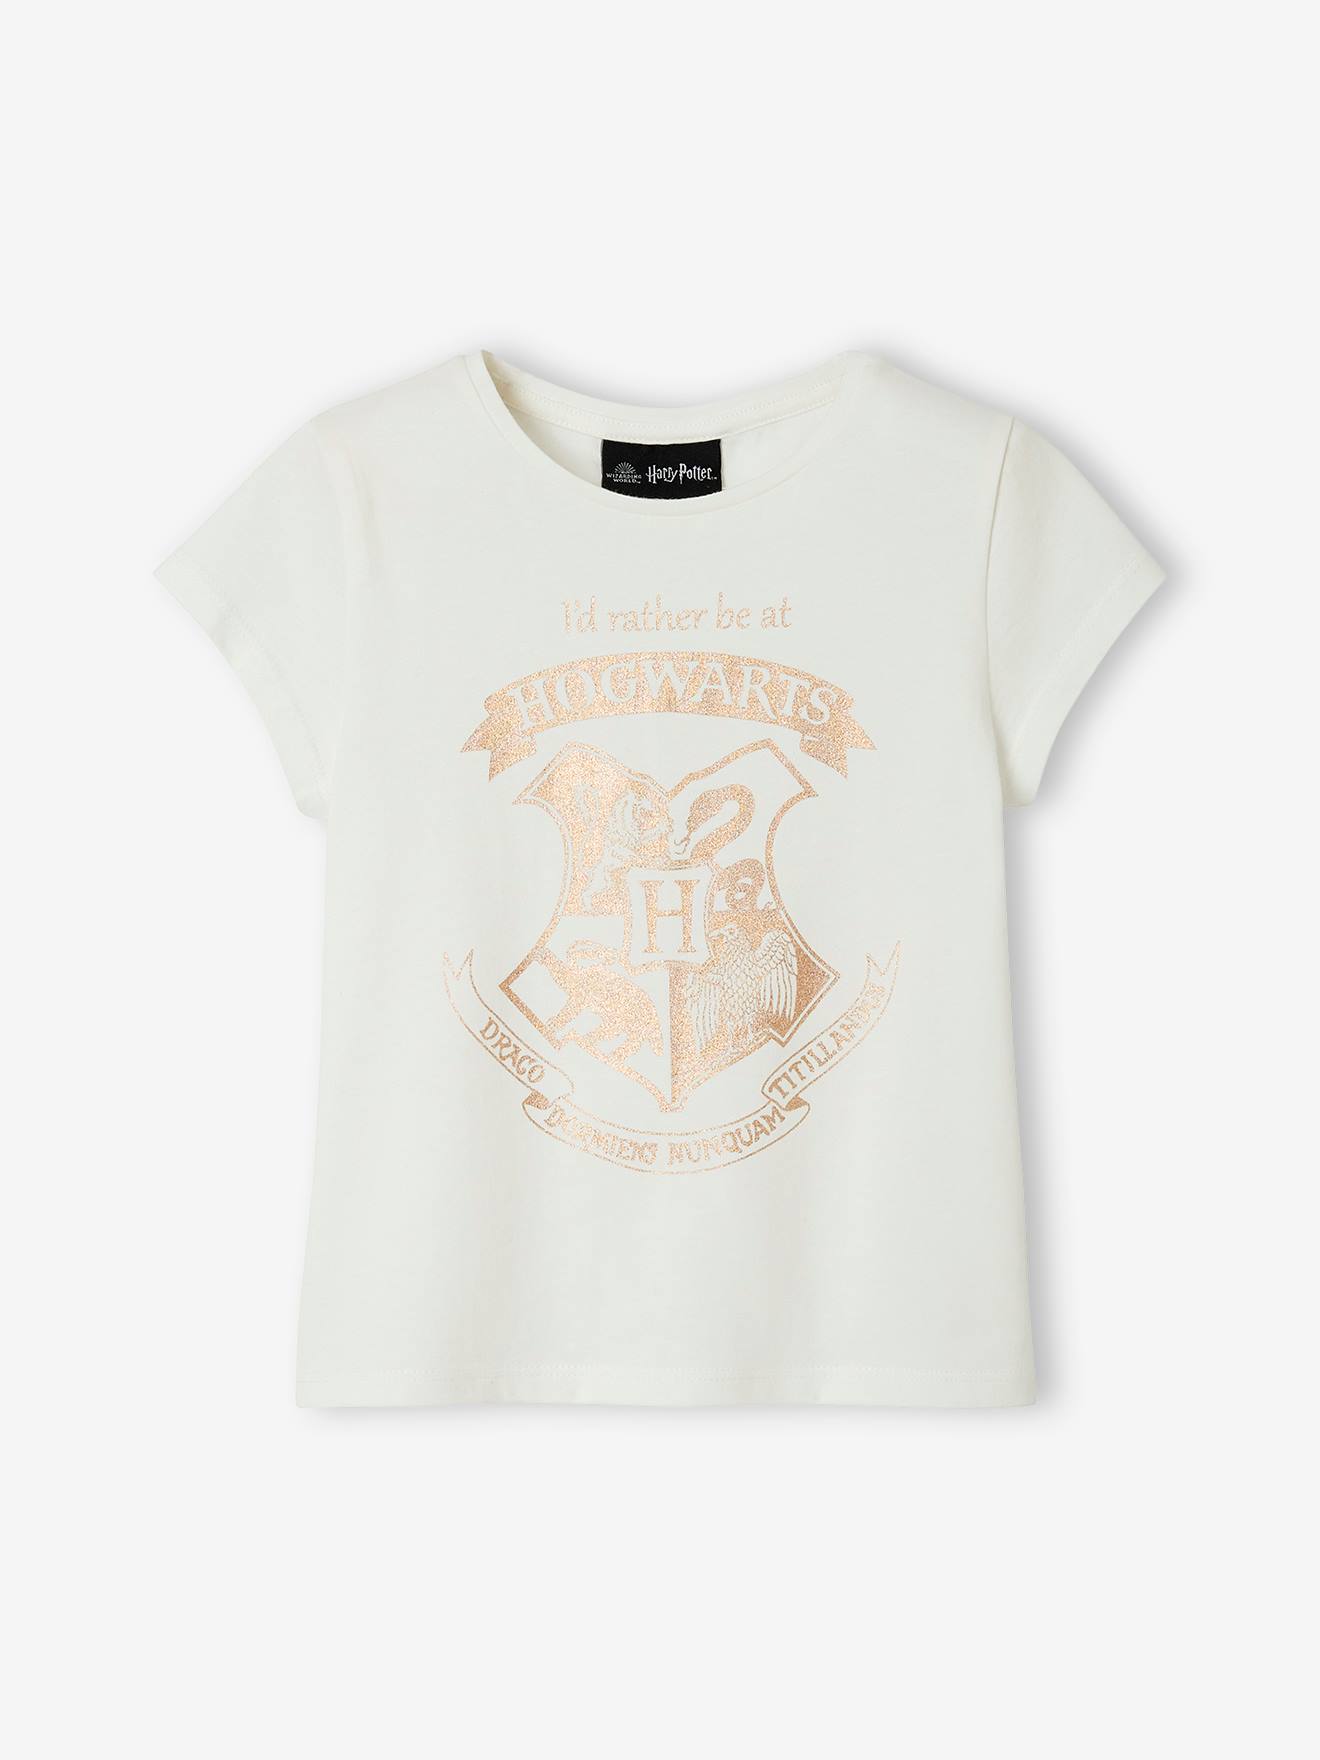 Harry Potter(r) T-Shirt for Girls white light solid with design